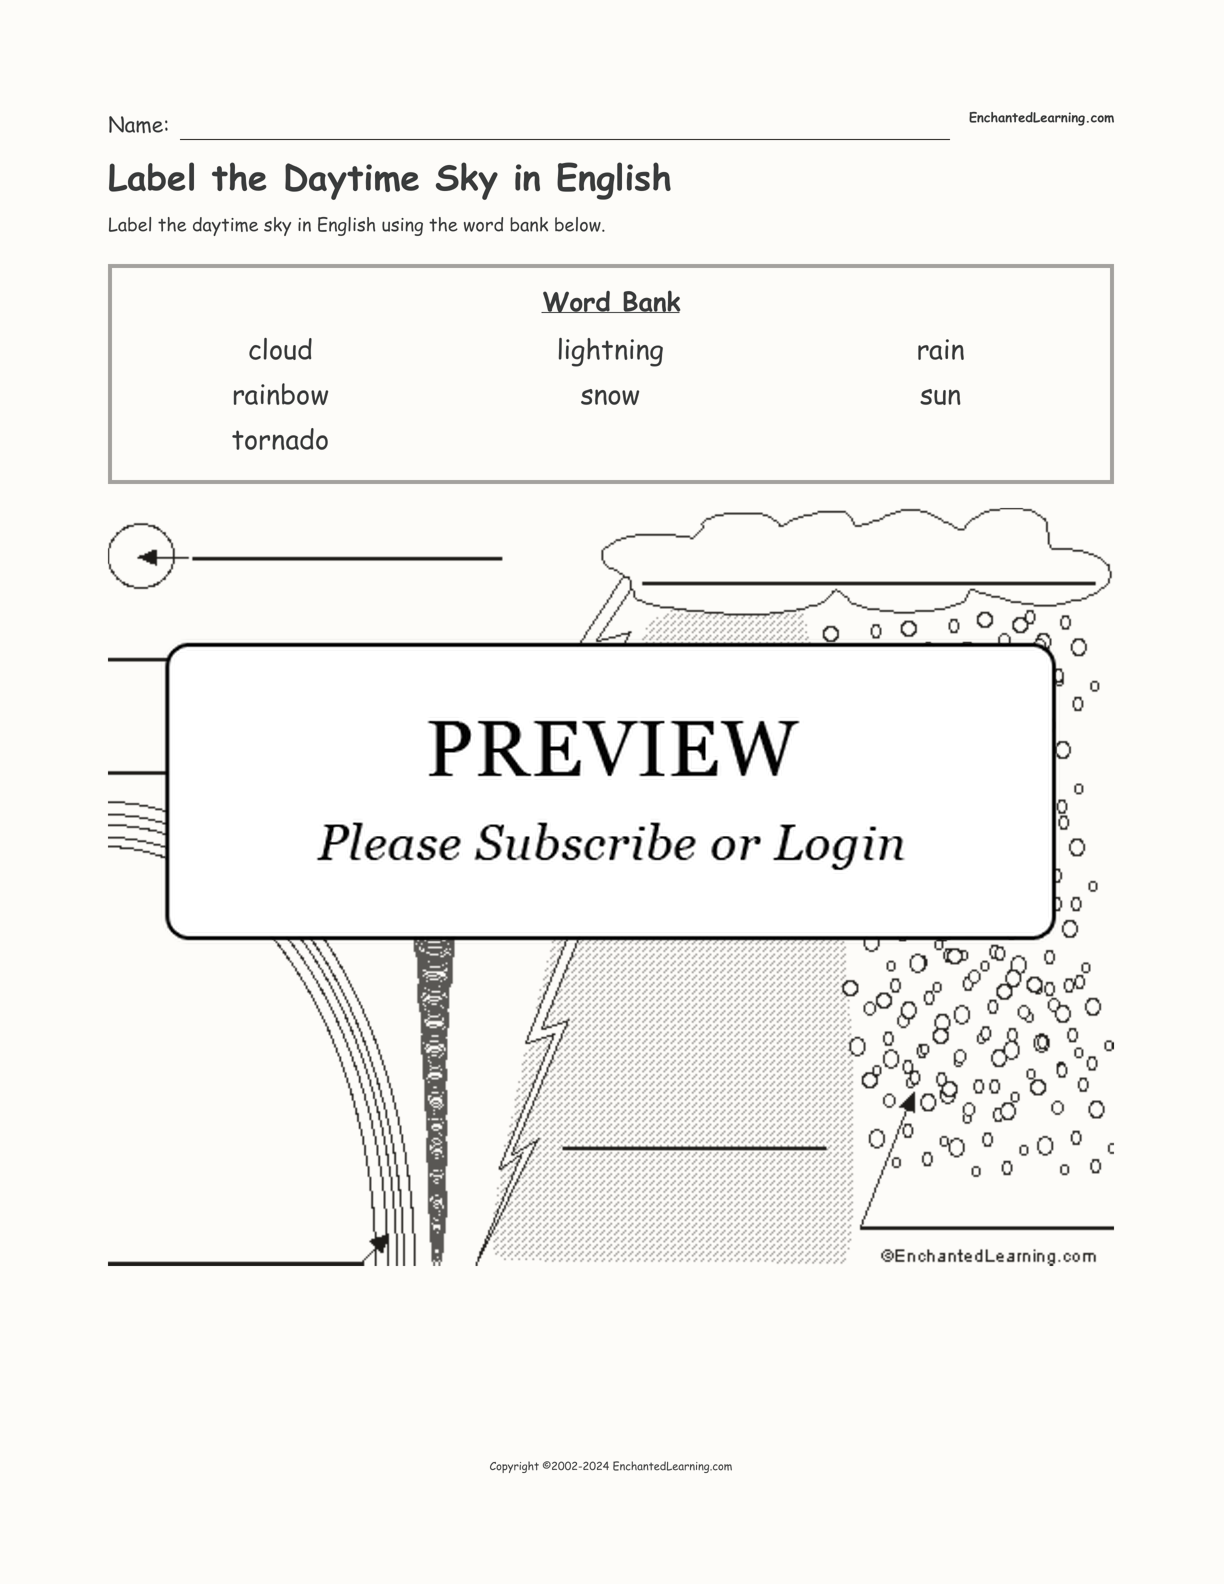 Label the Daytime Sky in English interactive worksheet page 1